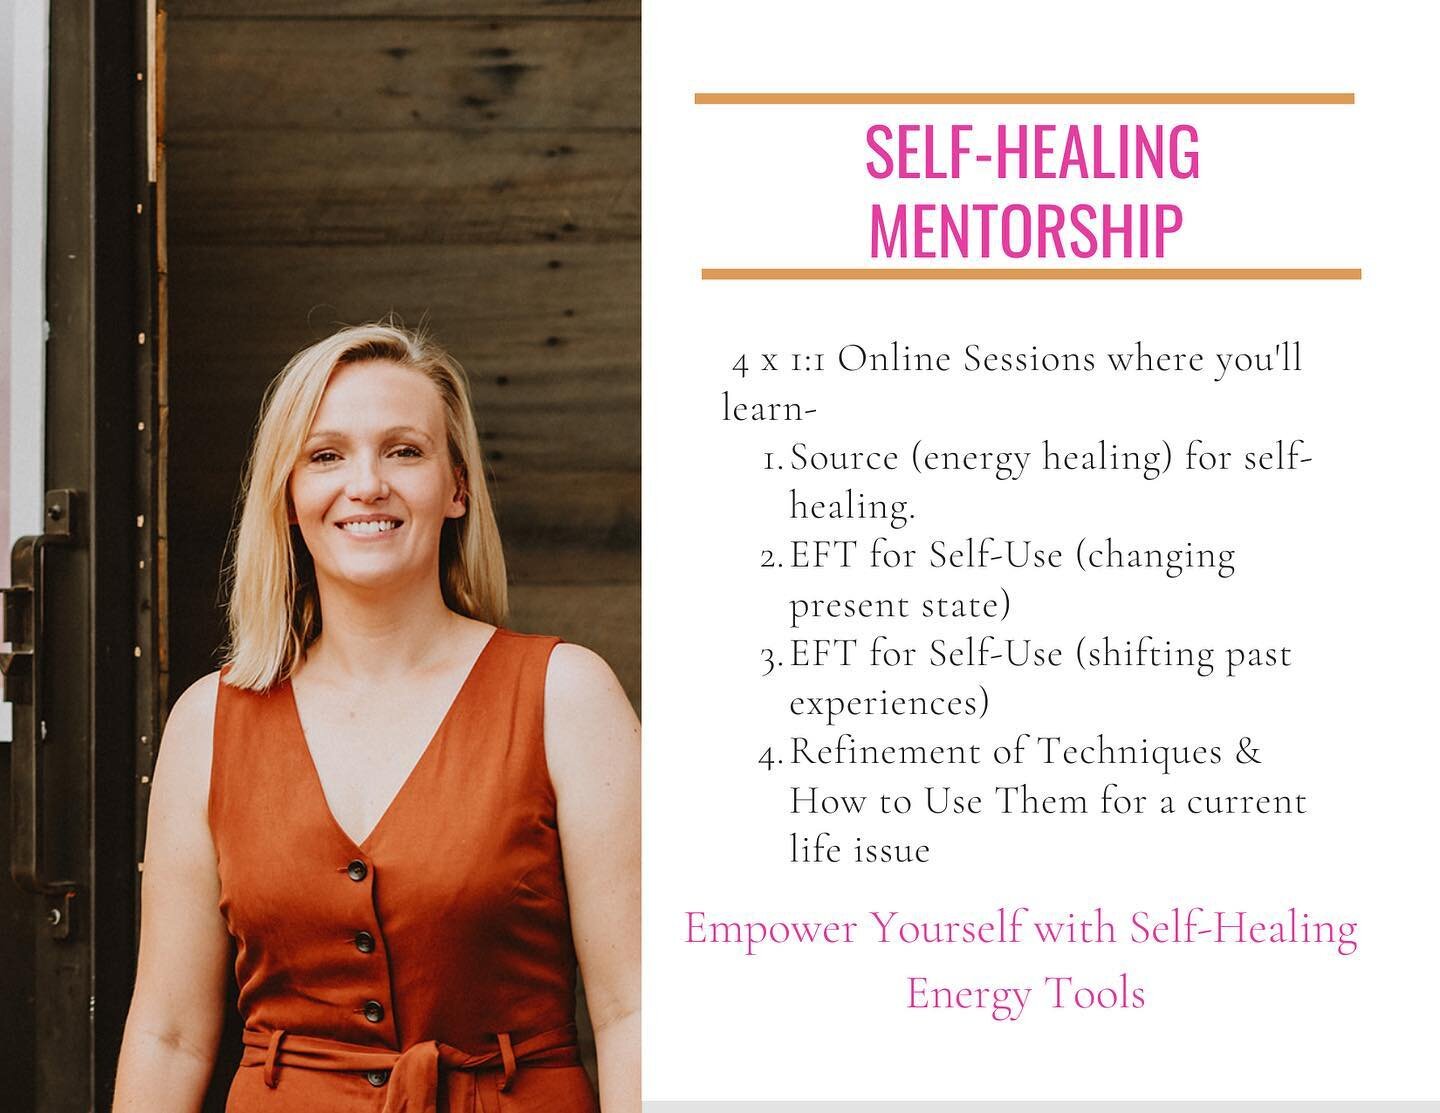 Ready to take the next step in empowering yourself with Self-Healing tools?
.
Work with me over four sessions where I teach you energy techniques to strengthen you for life! You&rsquo;ll have them in your tool belt forever after our four weeks togeth